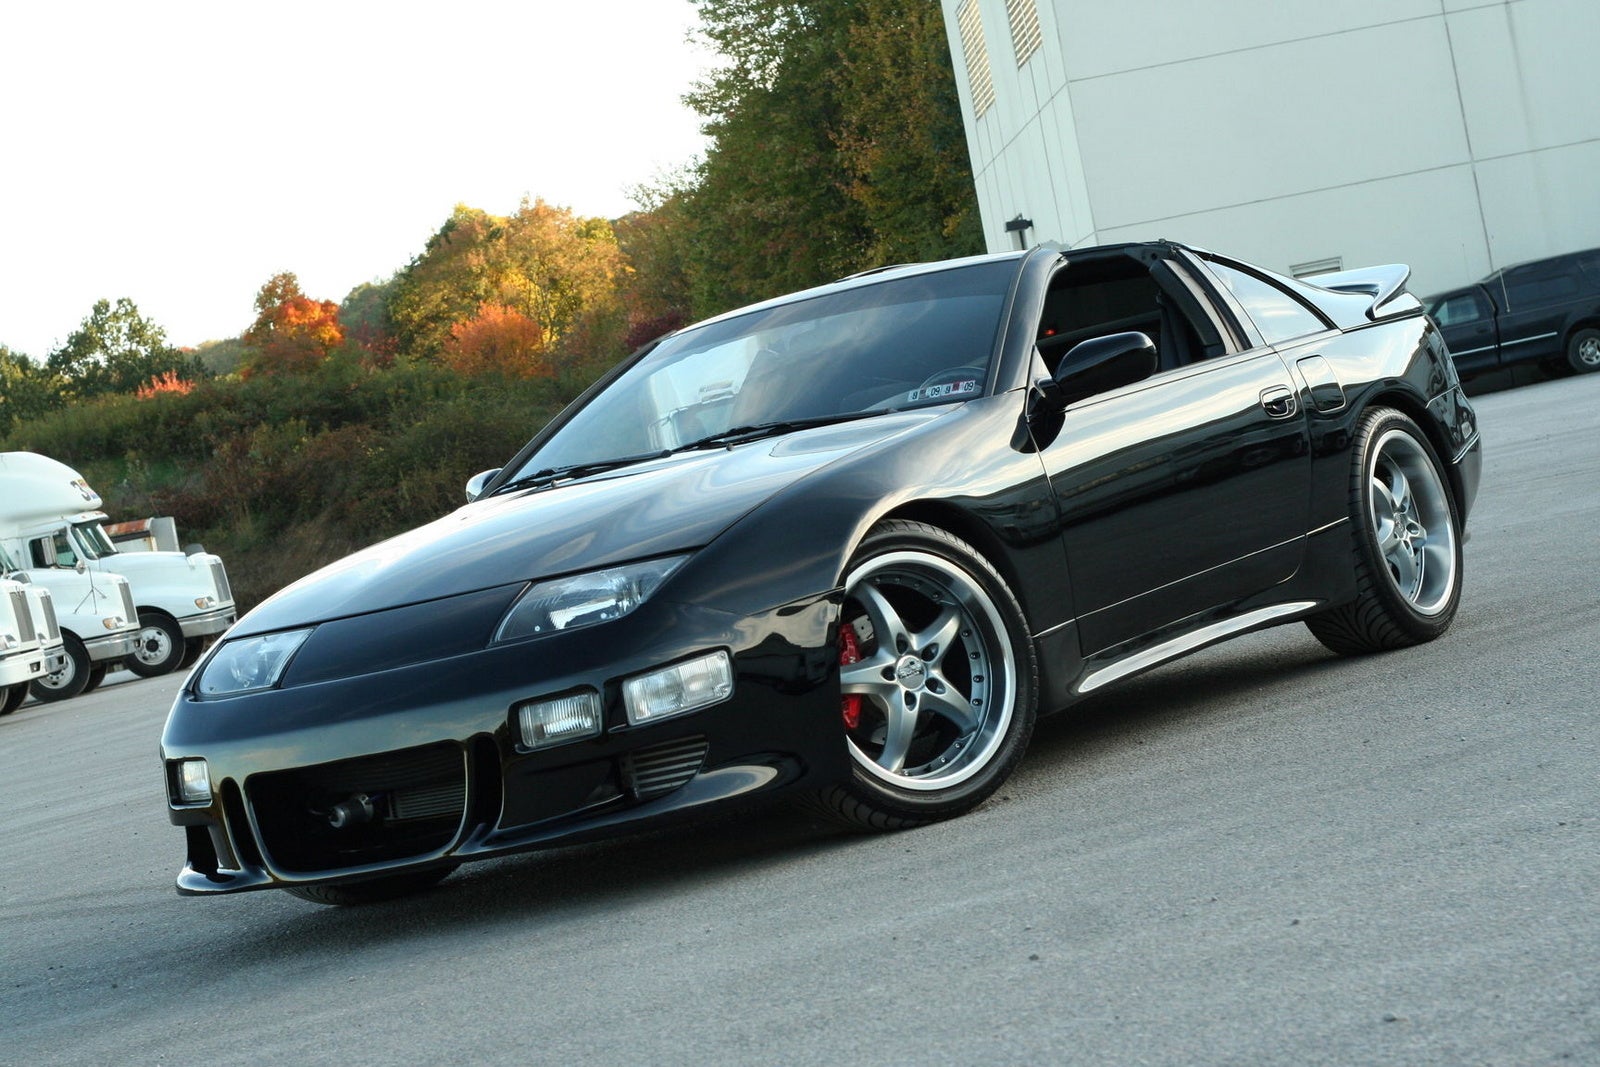 1991 Nissan 300ZX 2 Dr Turbo Hatchback picture, exterior